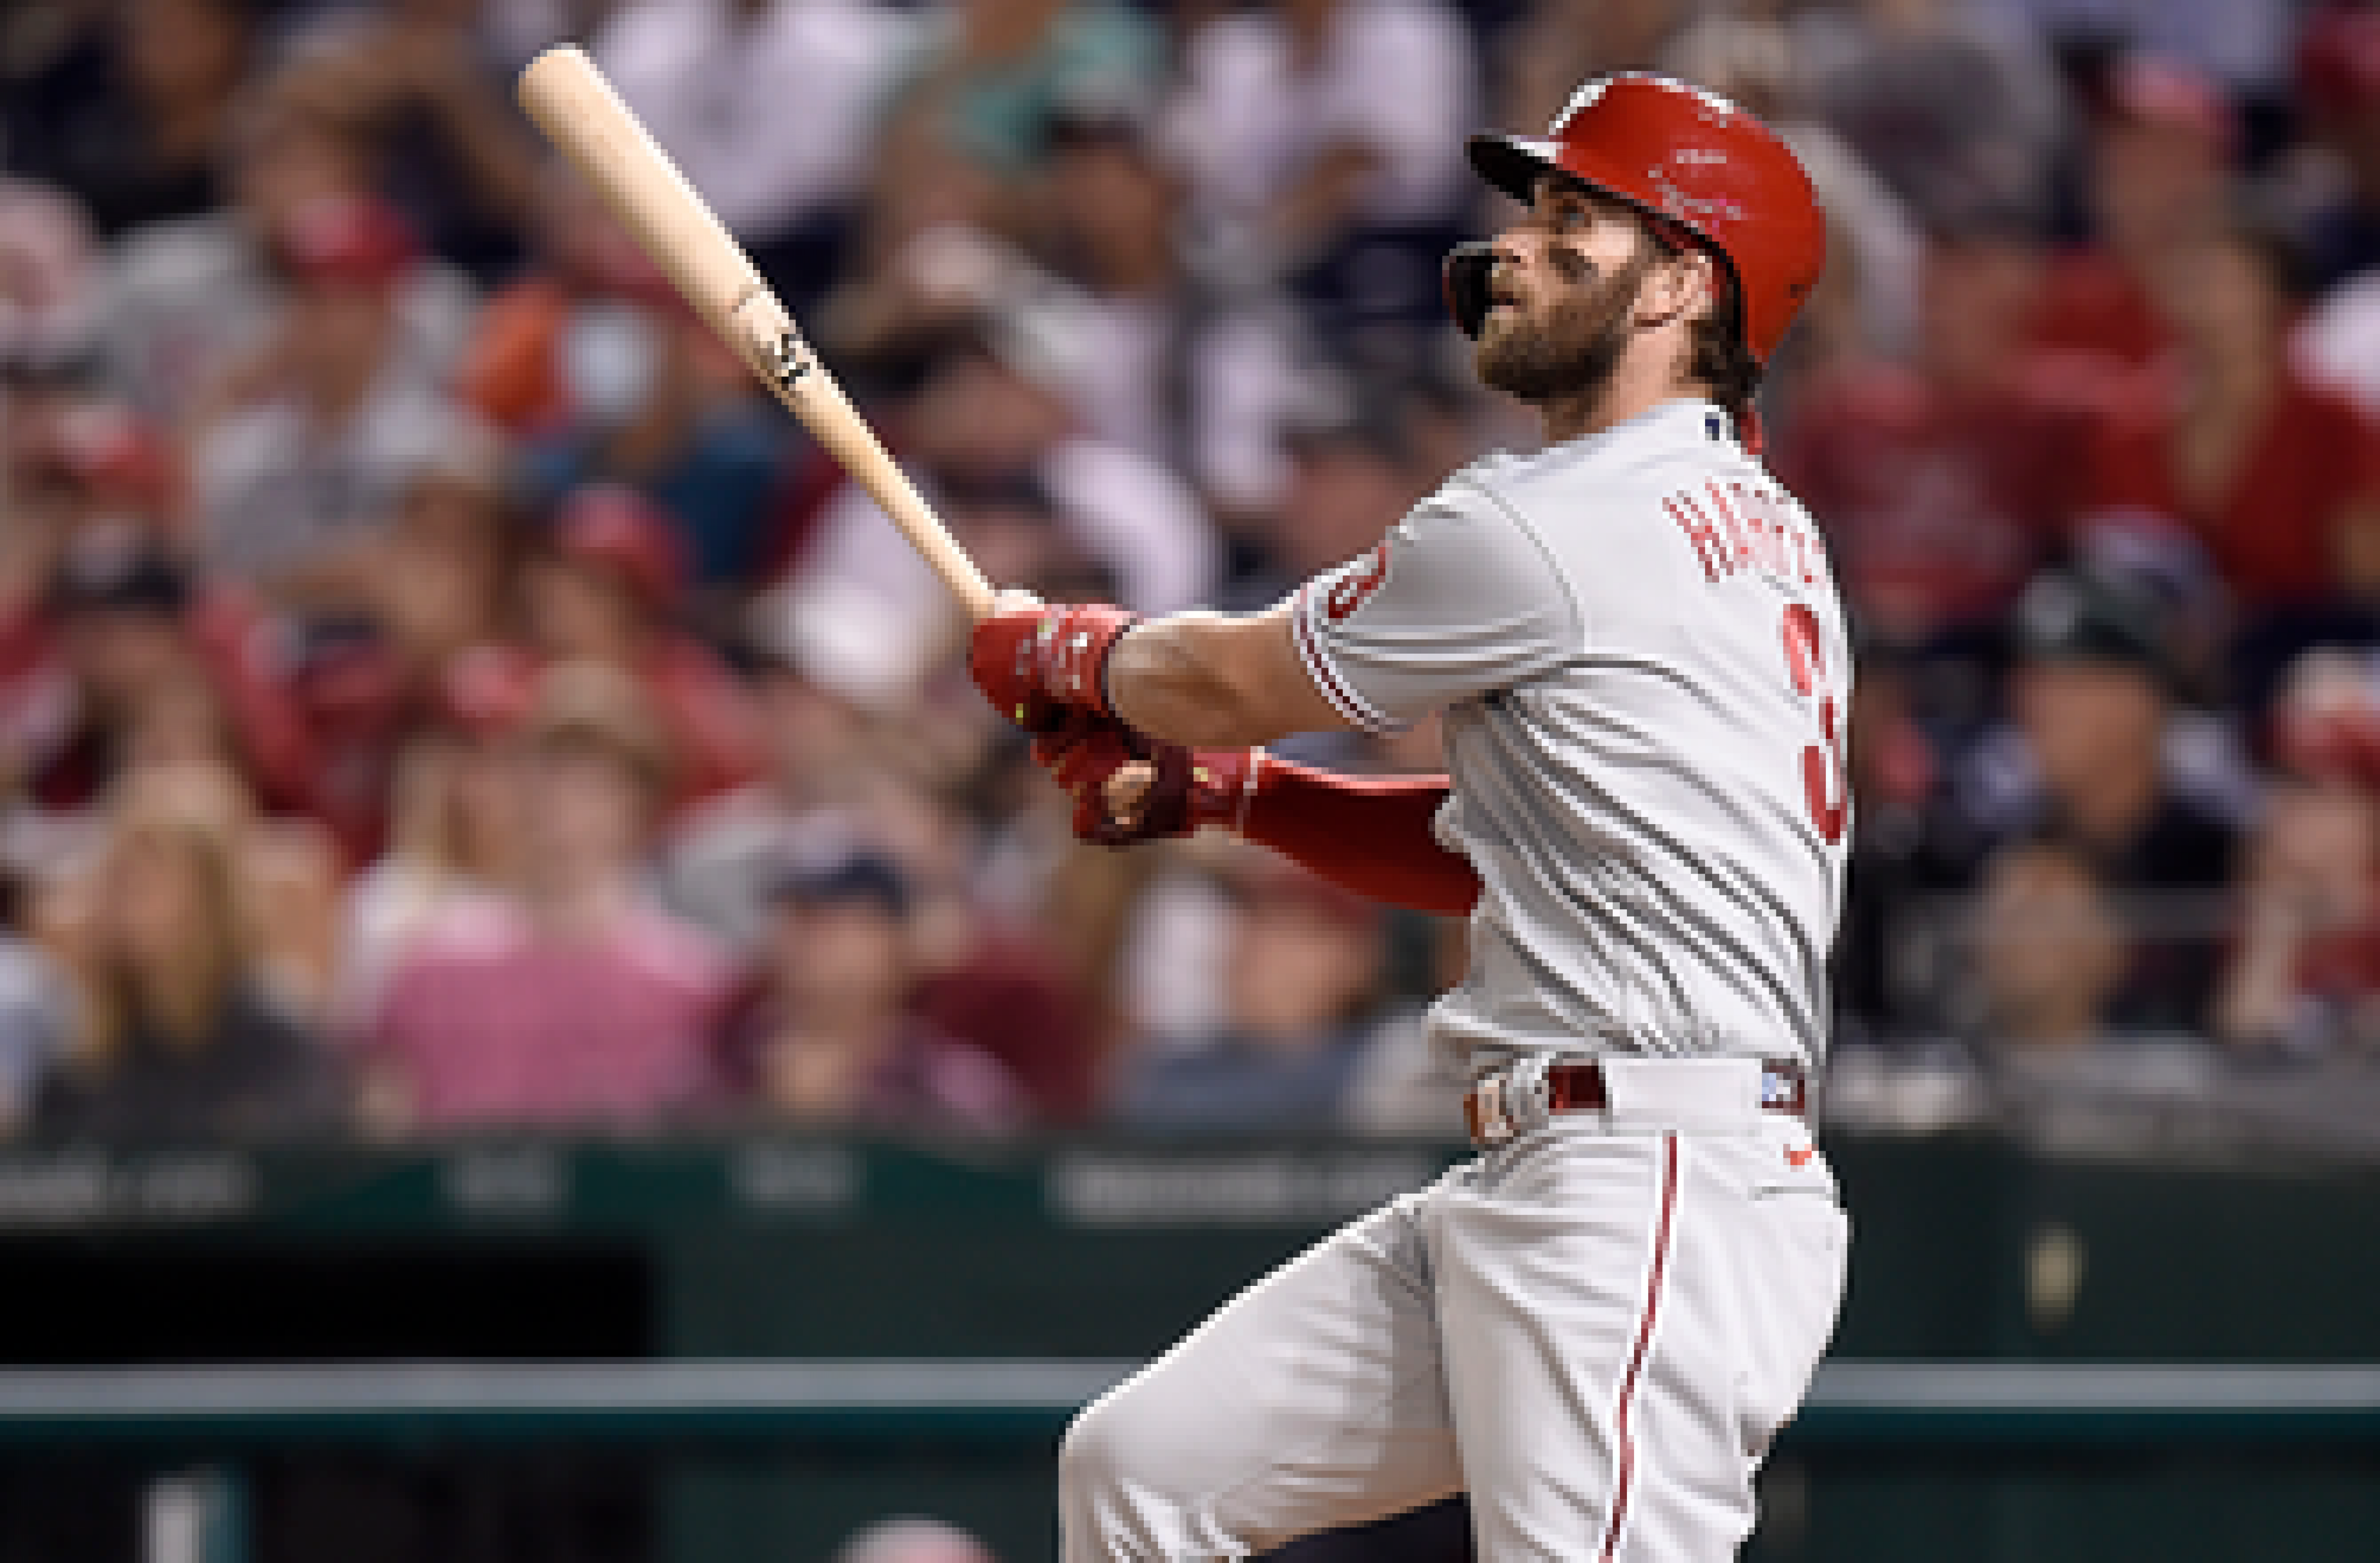 Bryce Harper helps Phillies to fourth-straight win defeating Nationals, 9-5